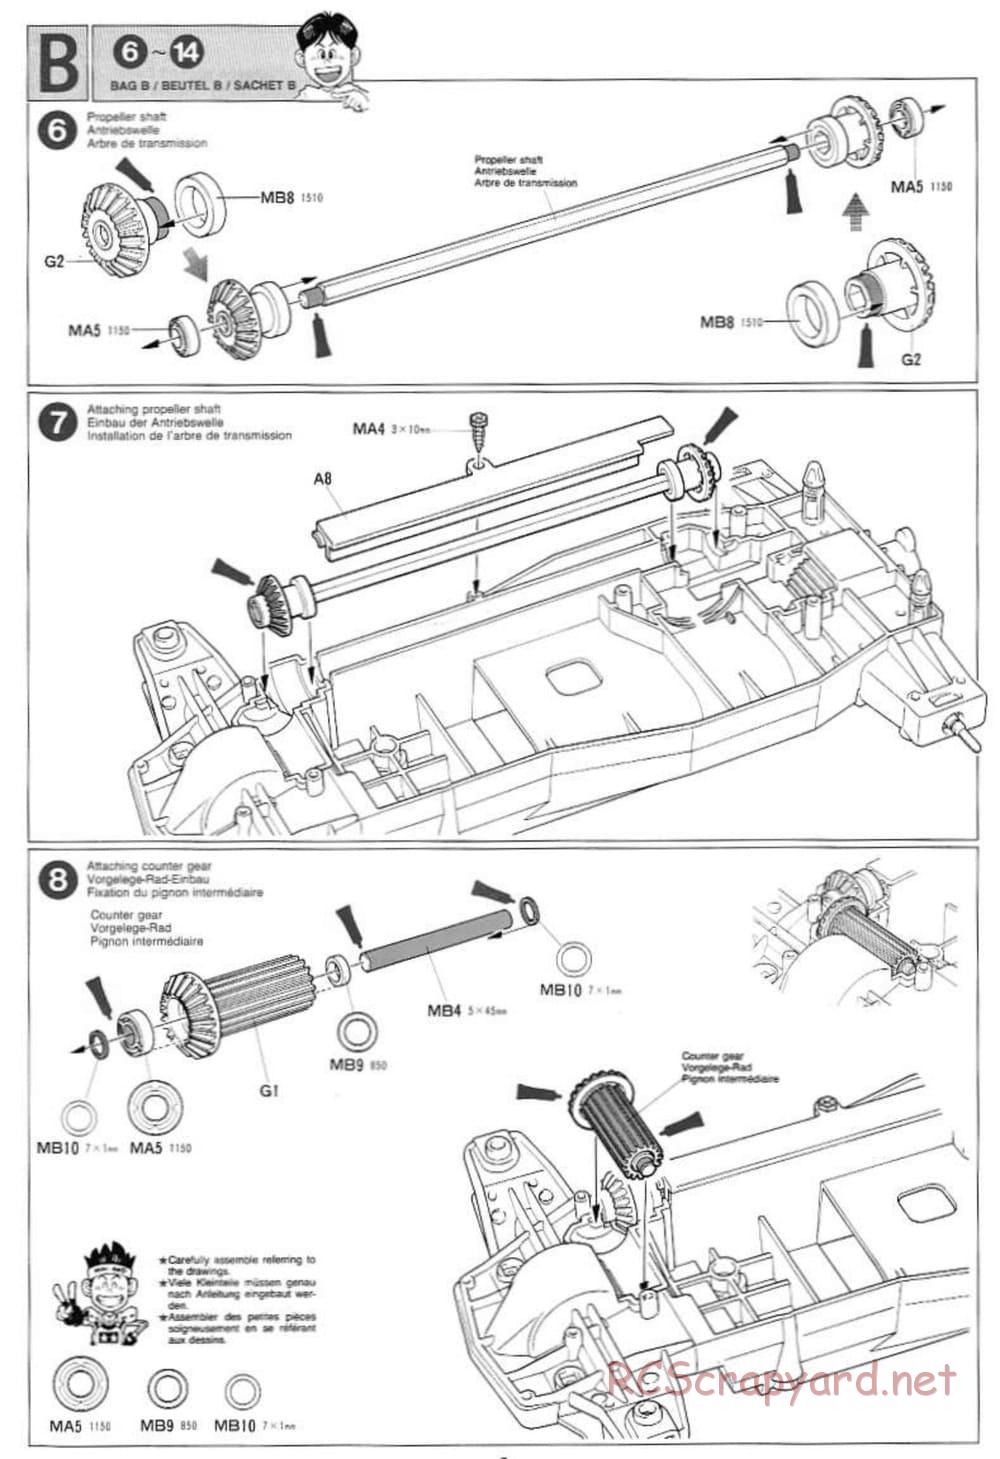 Tamiya - Voltec Fighter - Boy's 4WD Chassis - Manual - Page 6